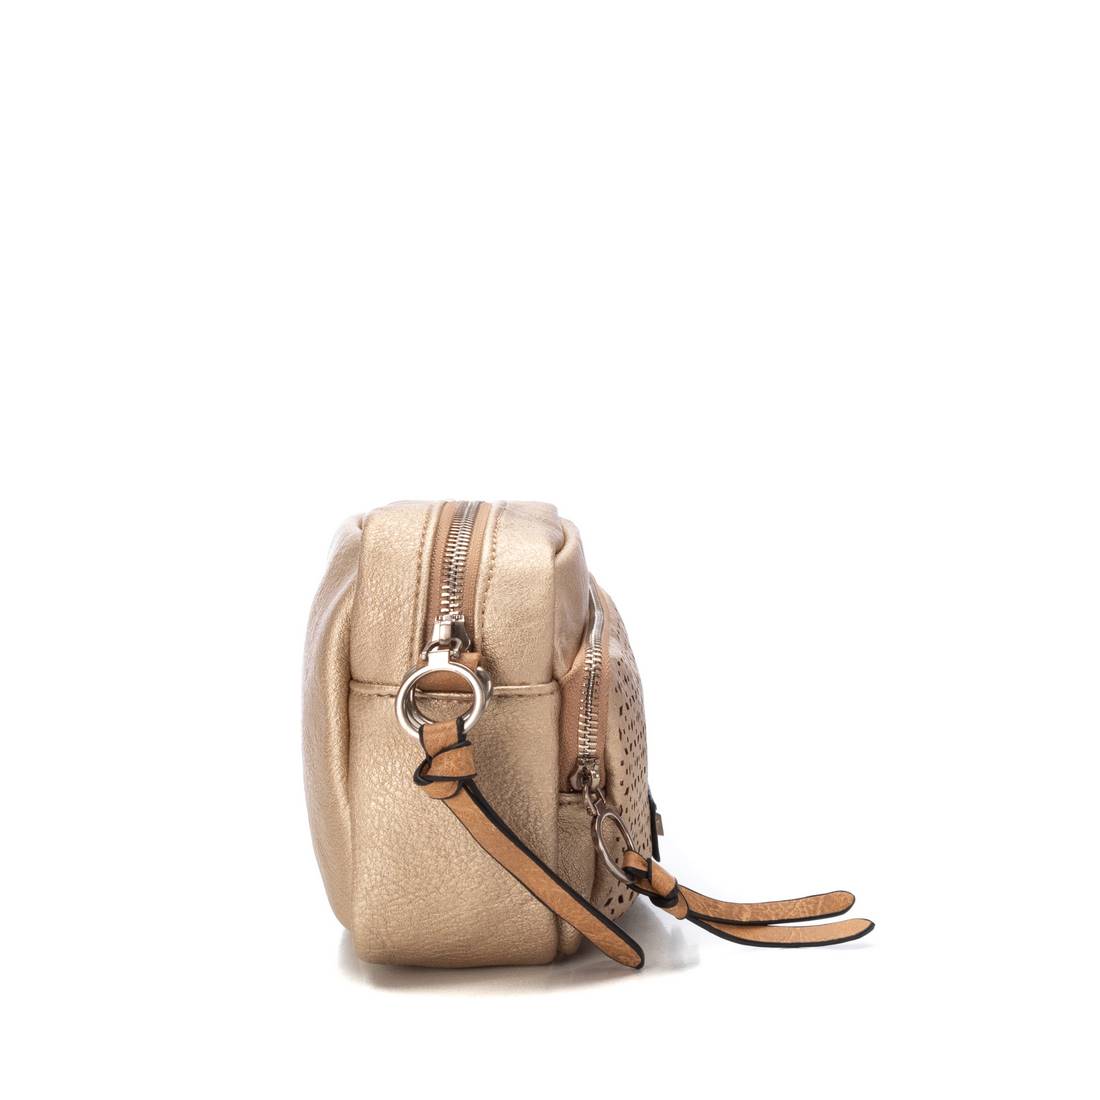 Refresh - Crossover Bag in Gold 183163